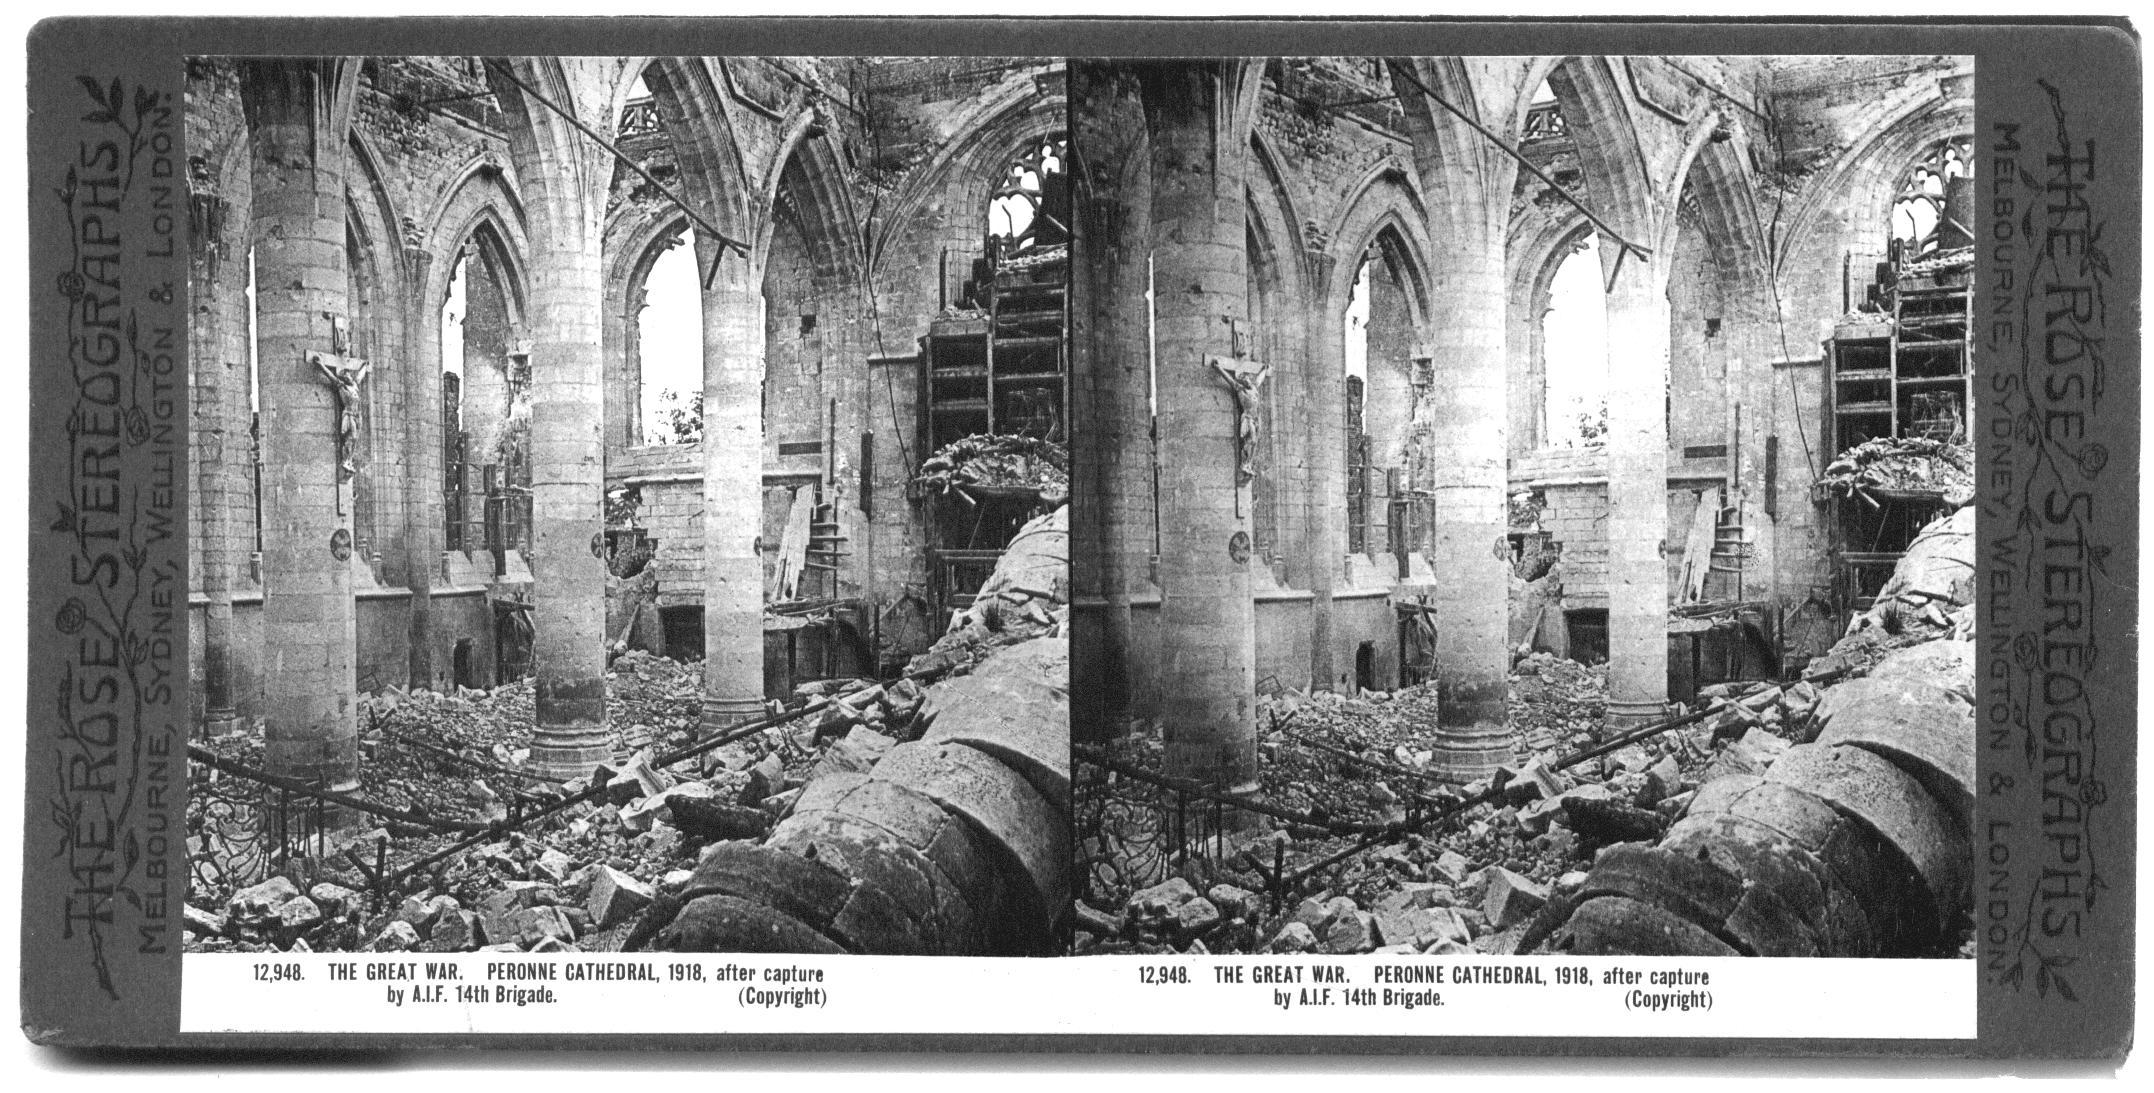 THE GREAT WAR. PERONNE CATHEDRAL, 1918, after capture by A.I.F. 14th Brigade.